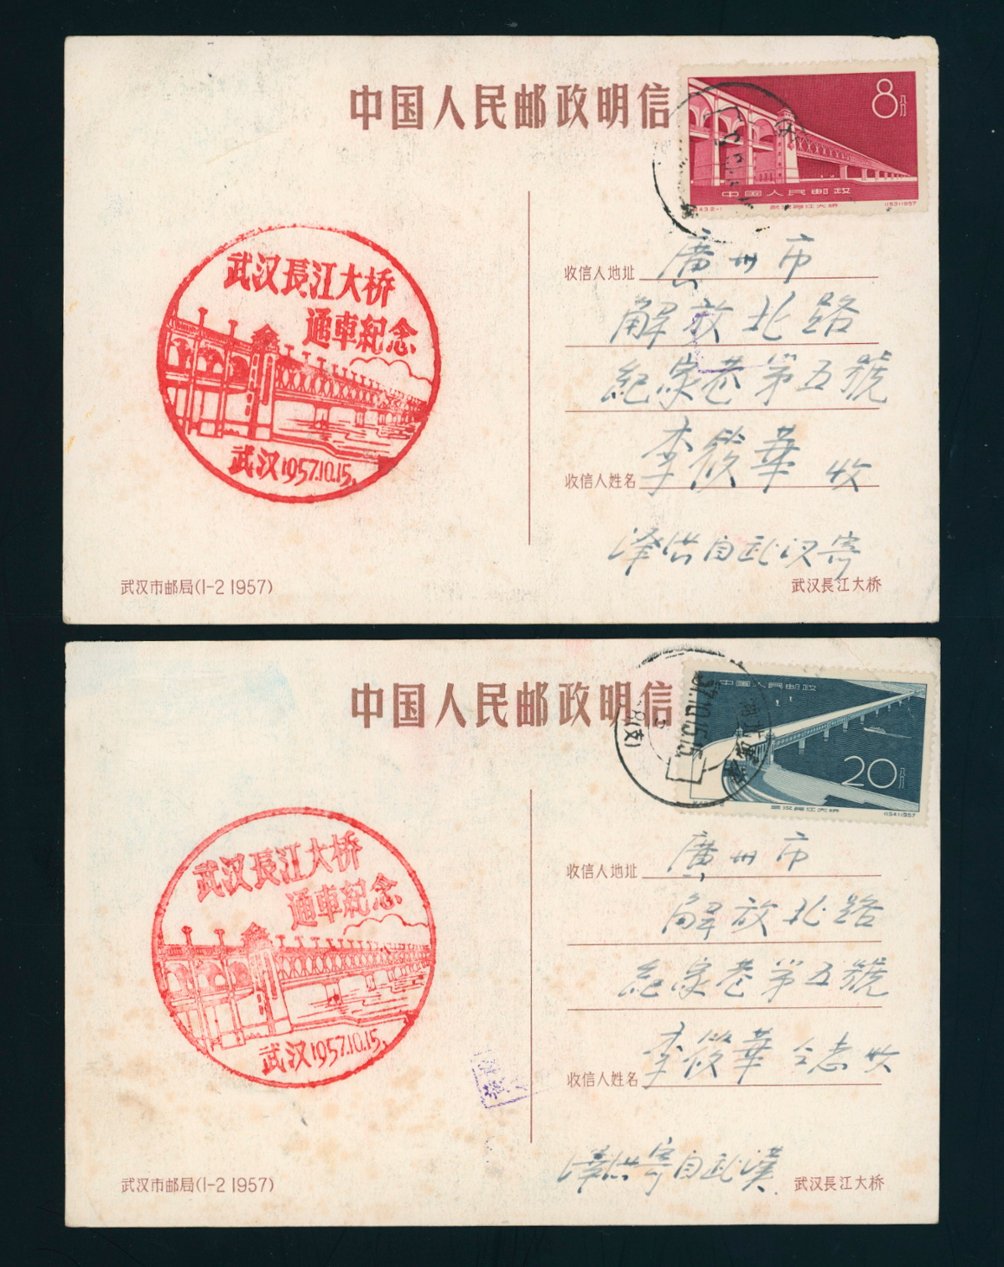 1957 Yangtze River Bridge mailed post cards with 319-20 (2 images)